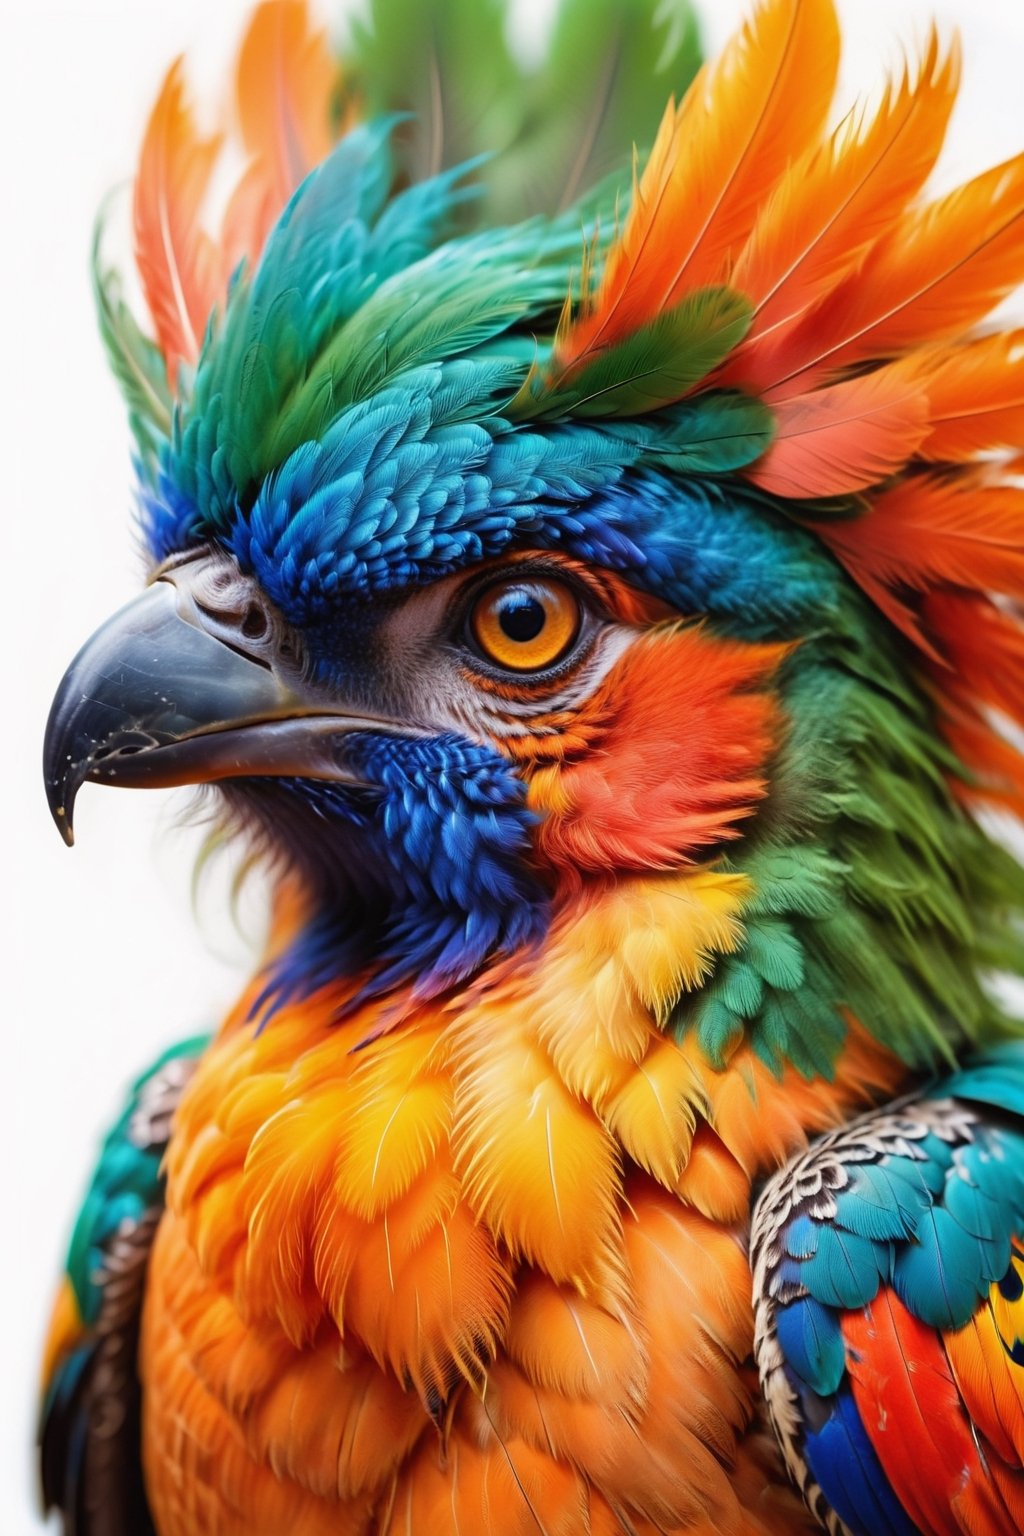 close up of the head of a beautiful highly colored feathered bird, phoenix, beautiful coloration of the feathers, ornate plumage, orange, green, blue, full head, bird of prey beak, high quality, 8k, sharp details, fine art painting, plain white background